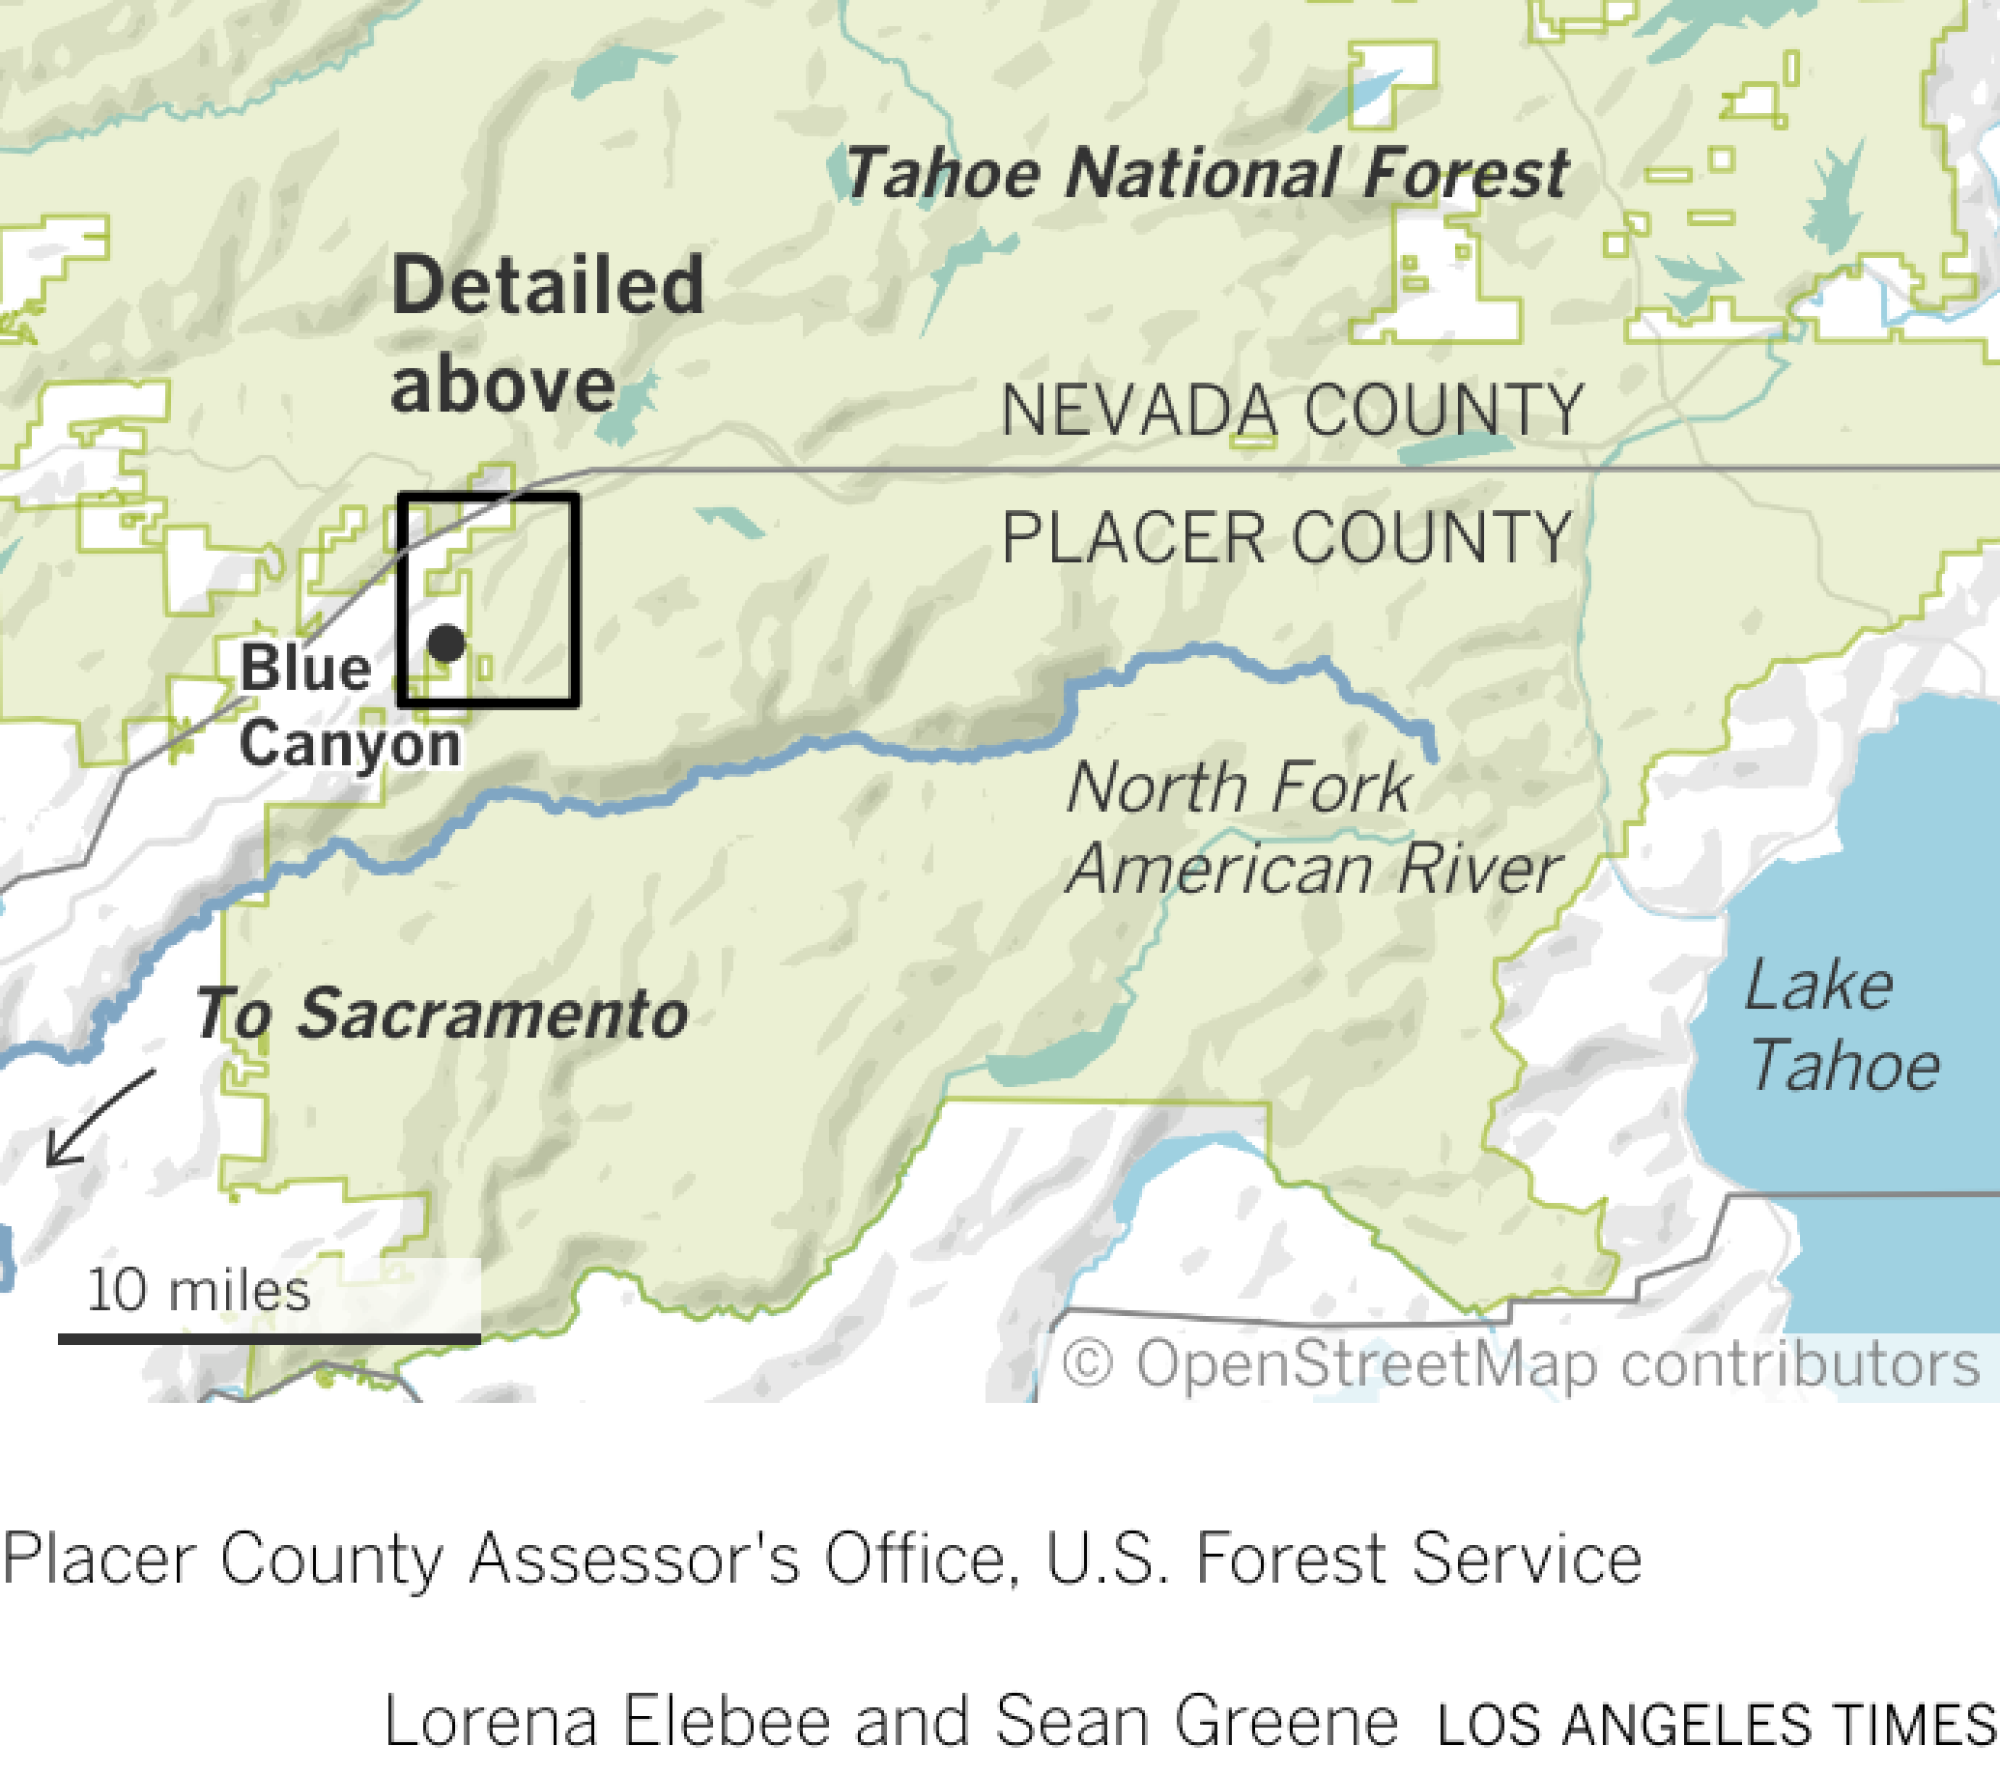 Map showing general location of Blue Canyon in relation to Tahoe National Forest, American River and Lake Tahoe.